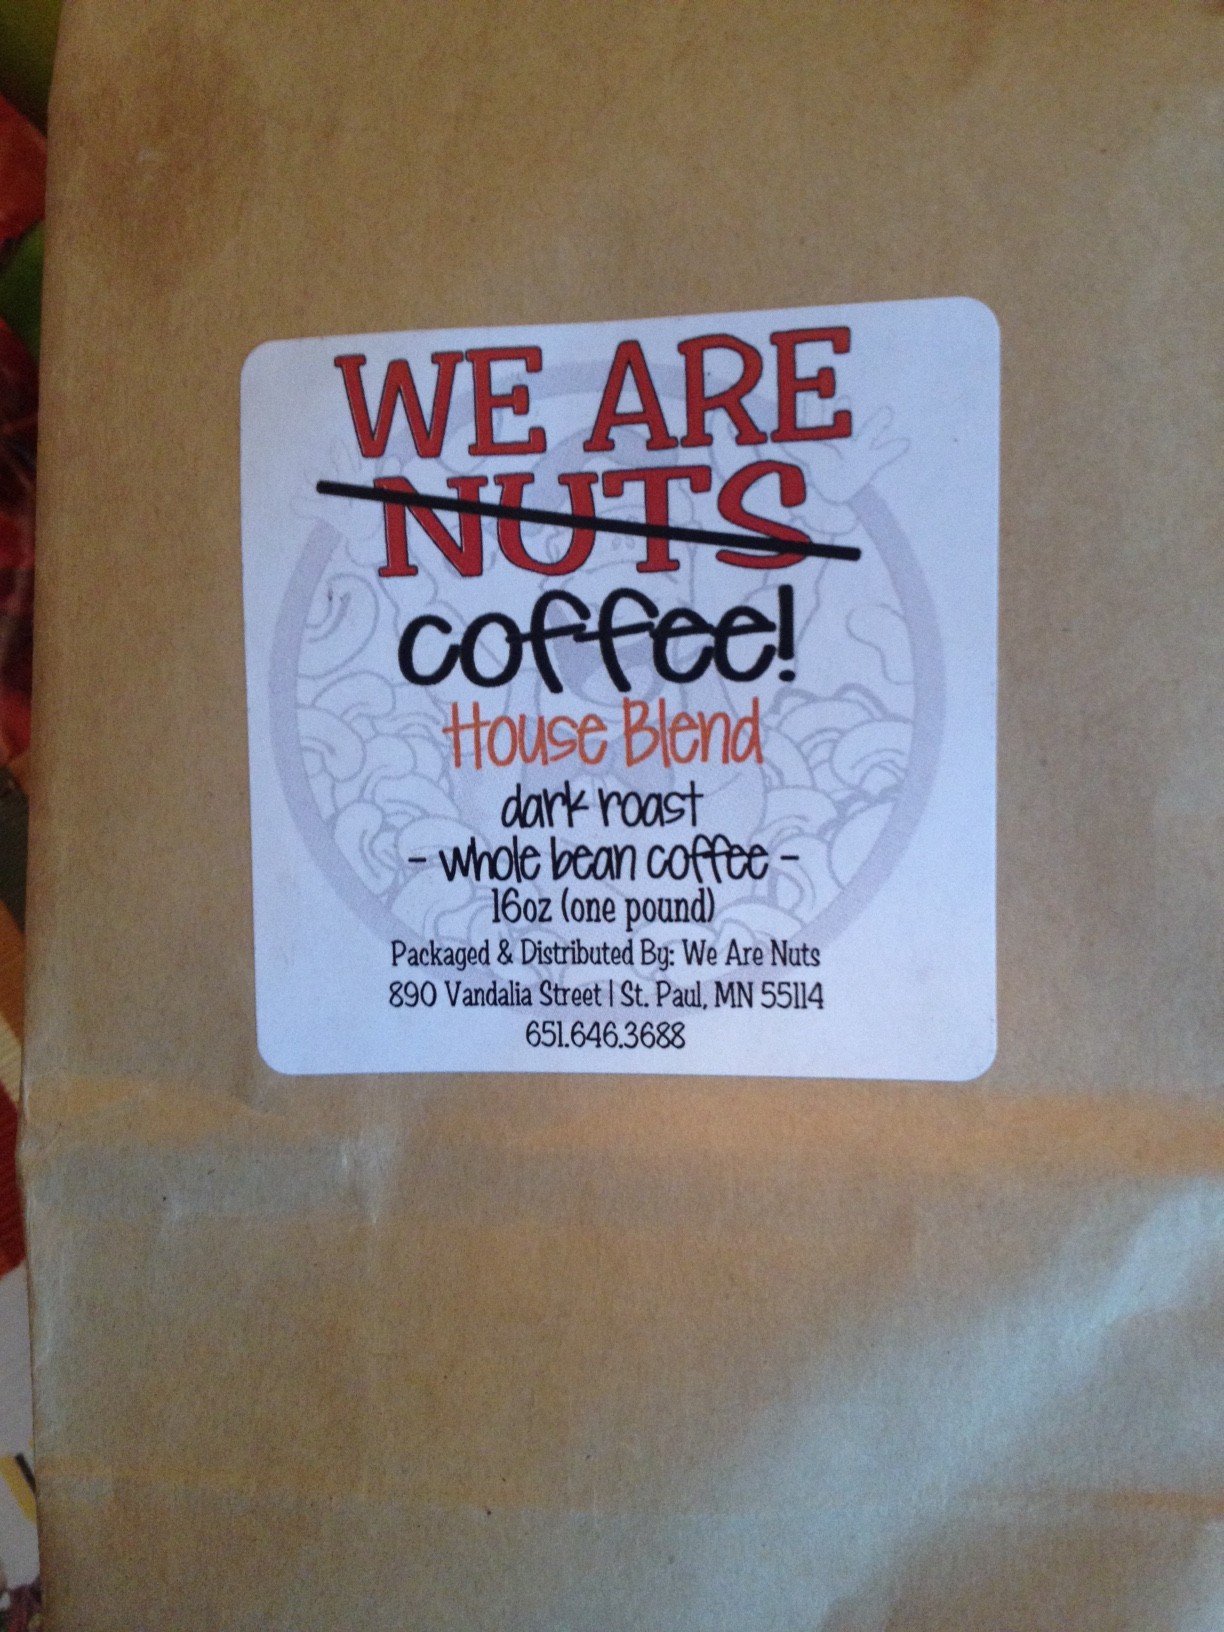 Photo showing We Are Nuts regular ground coffee